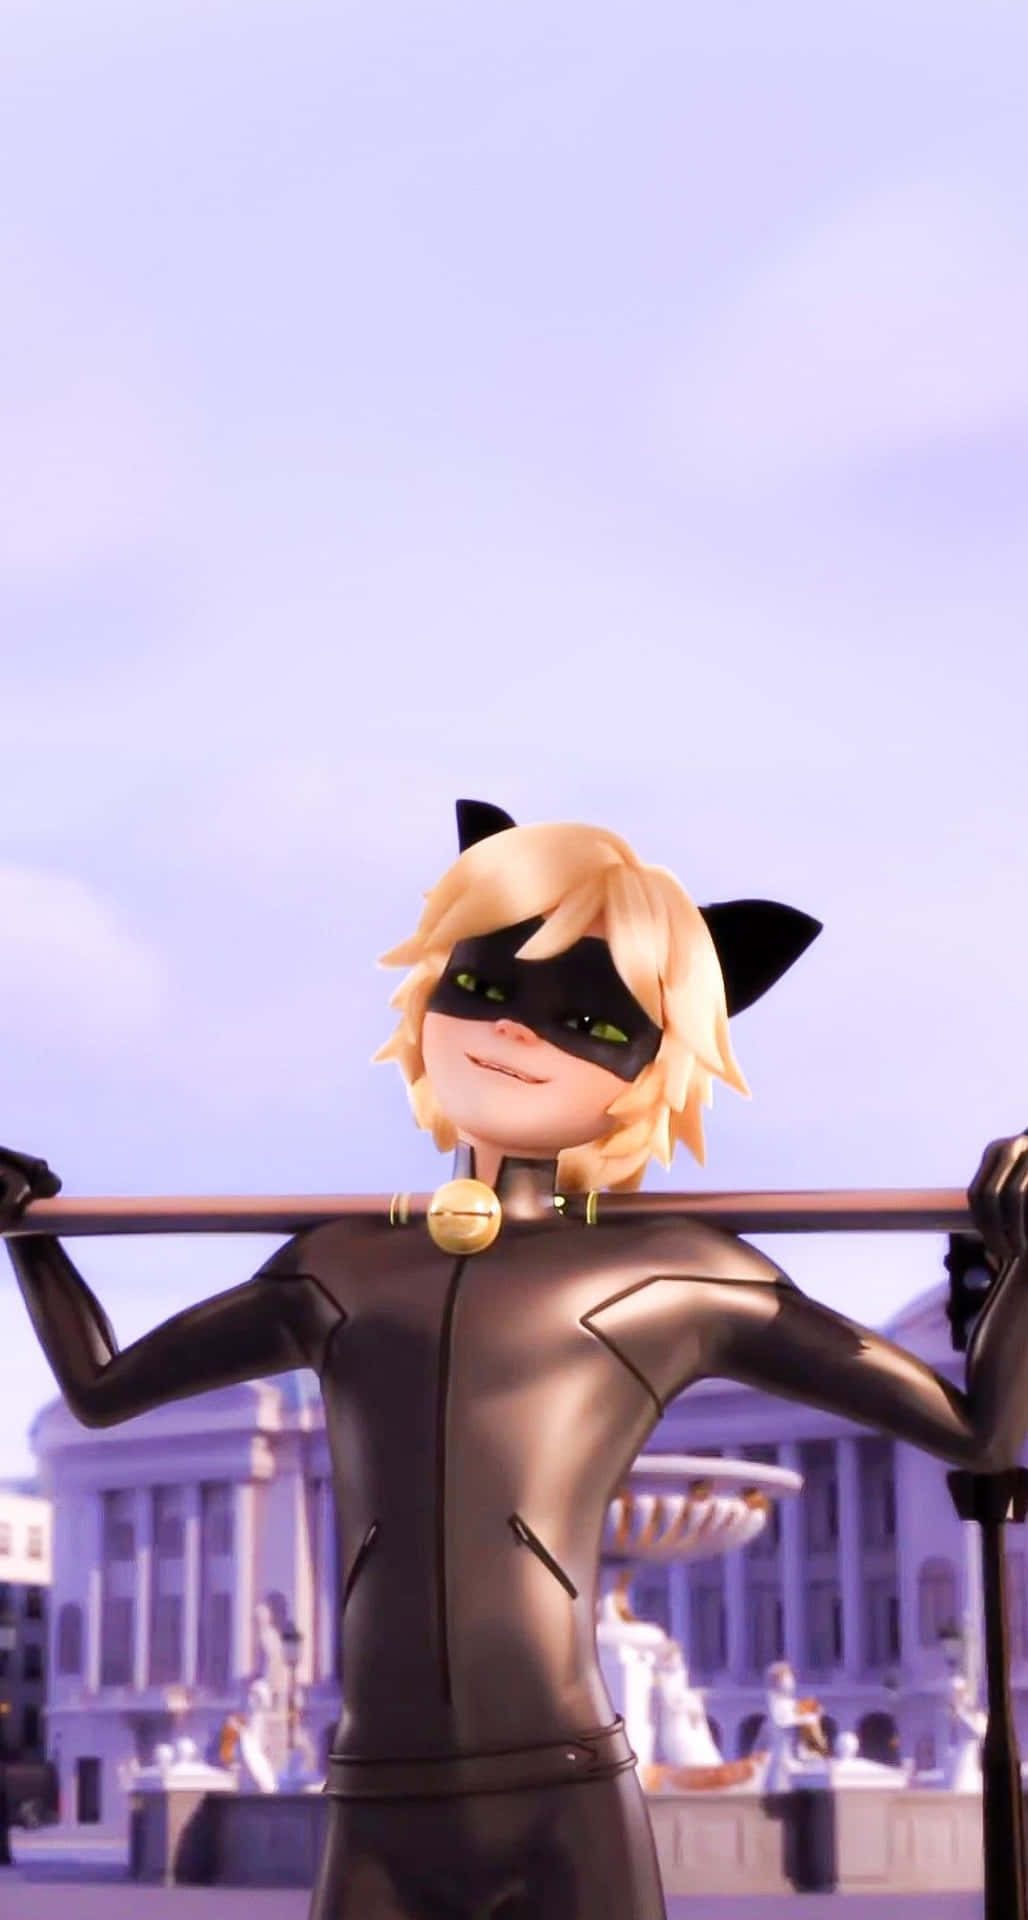 Miraculous: Tales Of Ladybug And Chat Noir Background